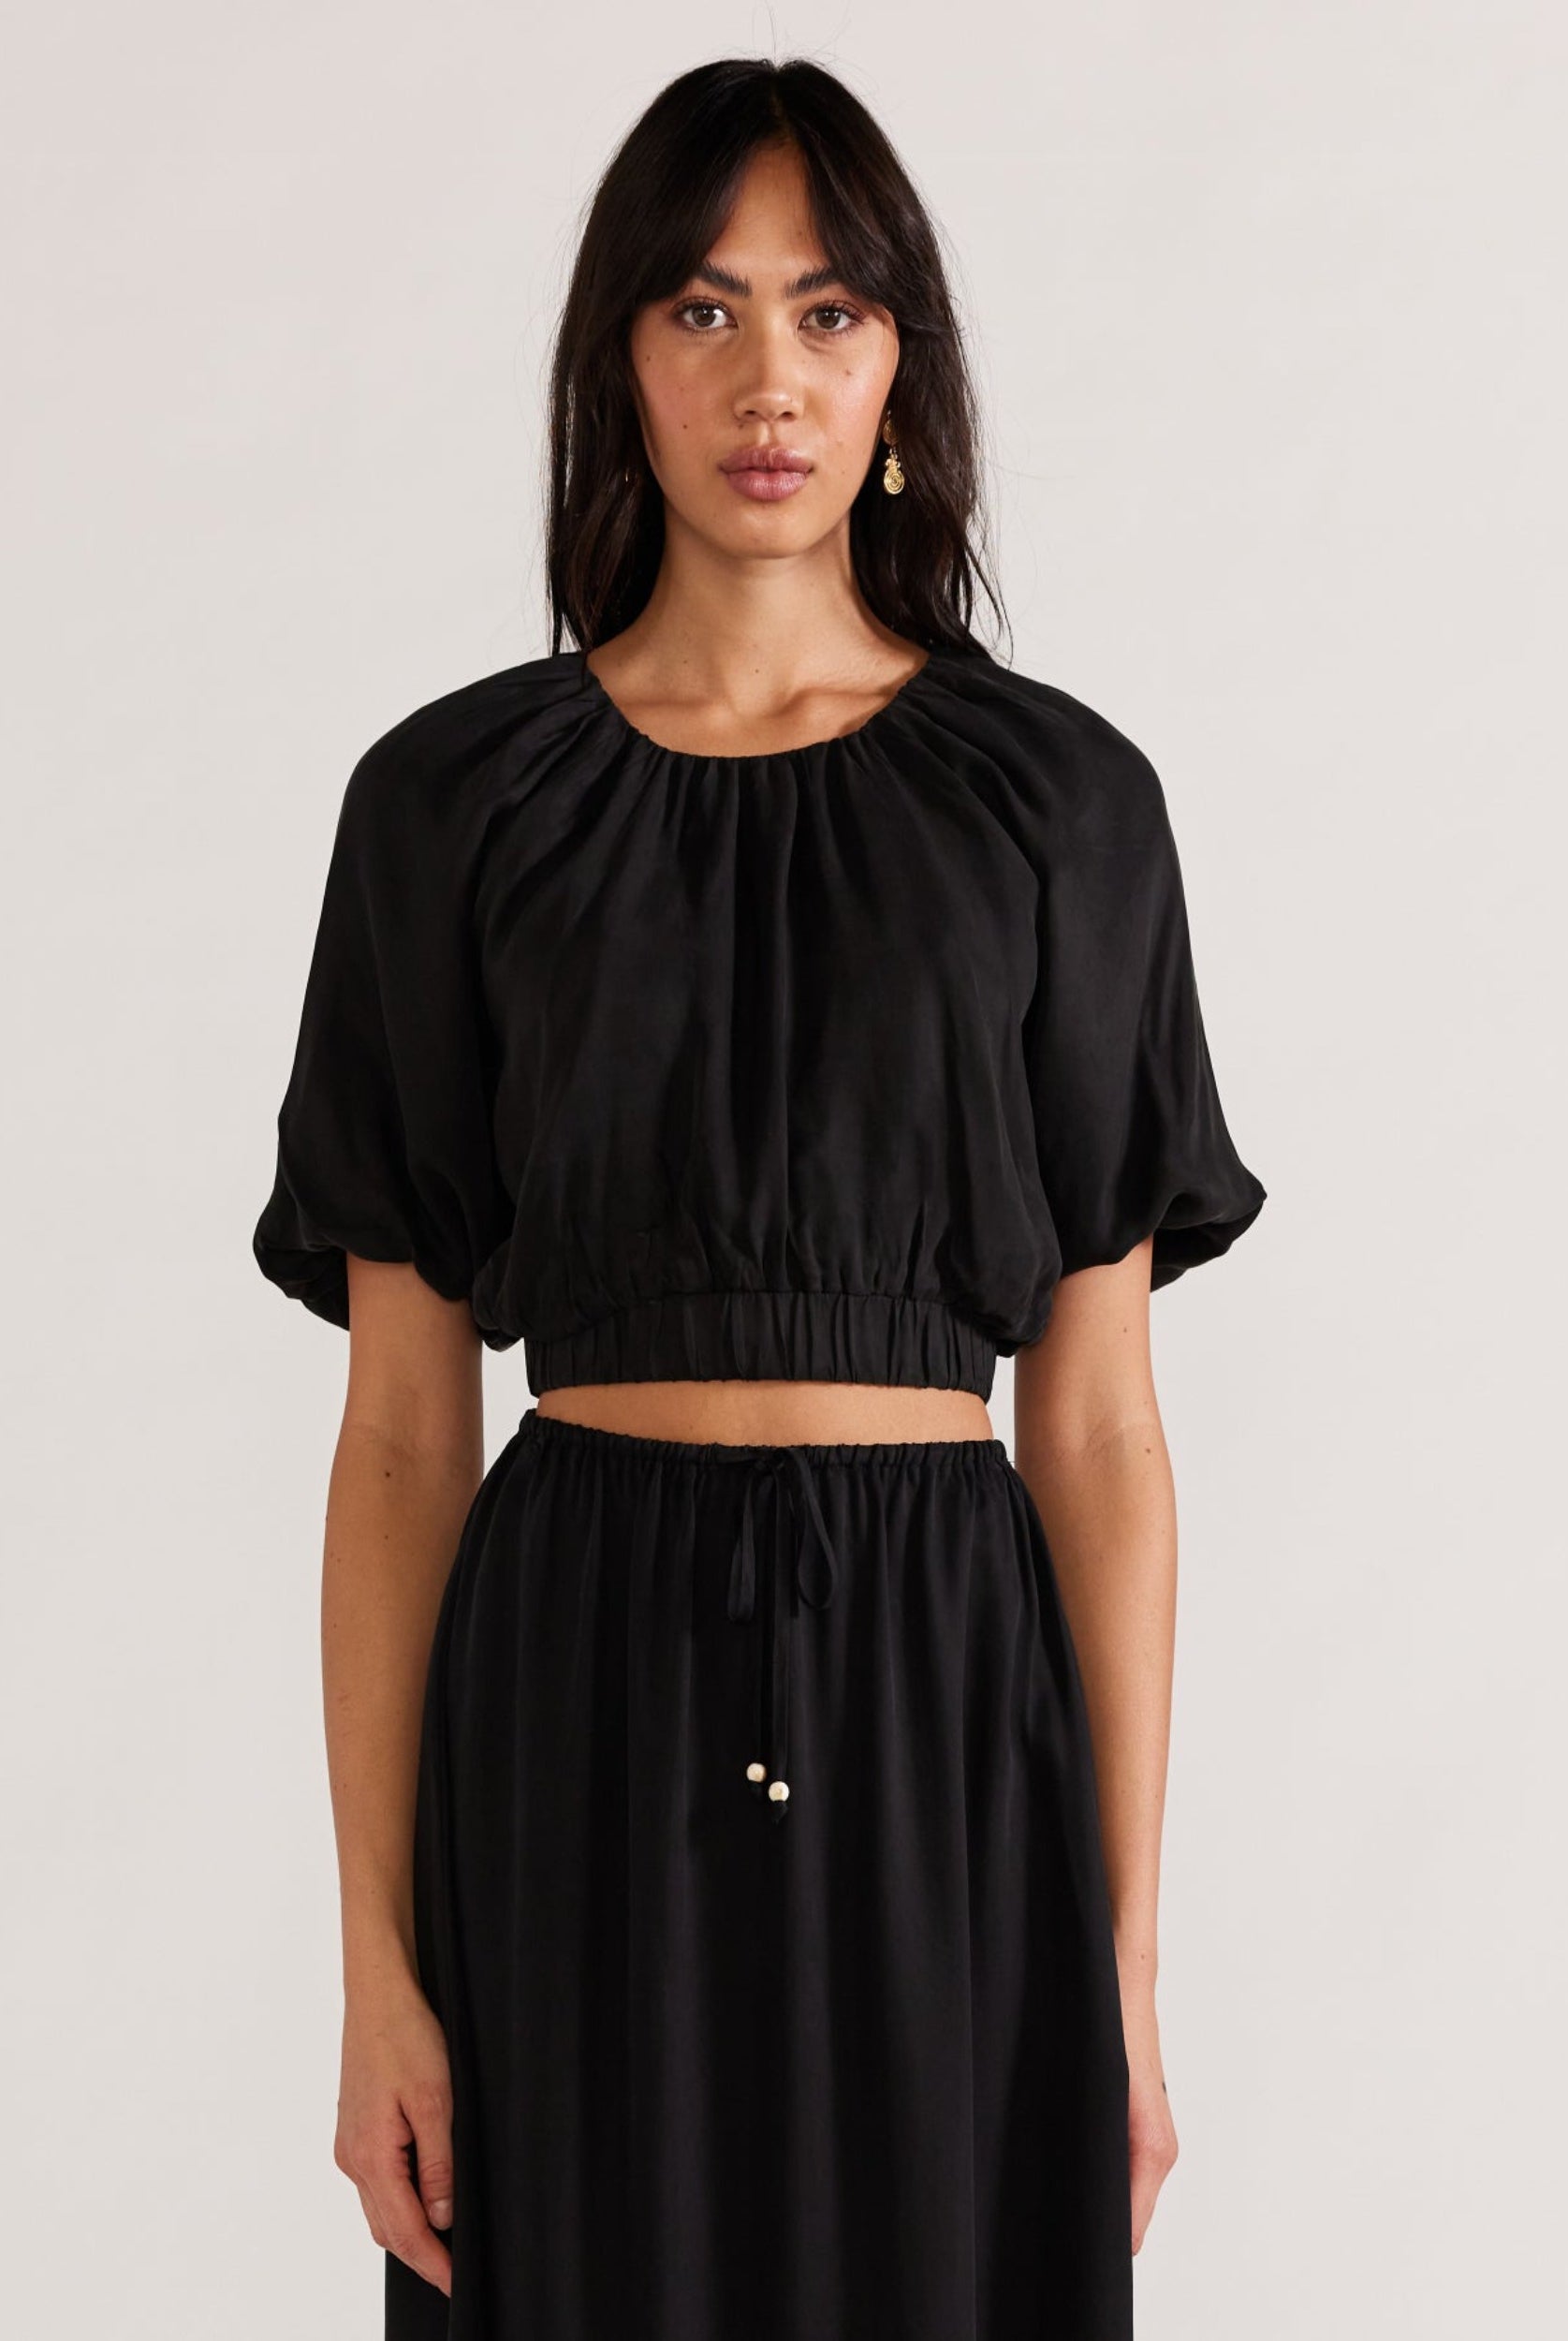 Black cropped top with matching skirt in cupro fabric from Staple the Label